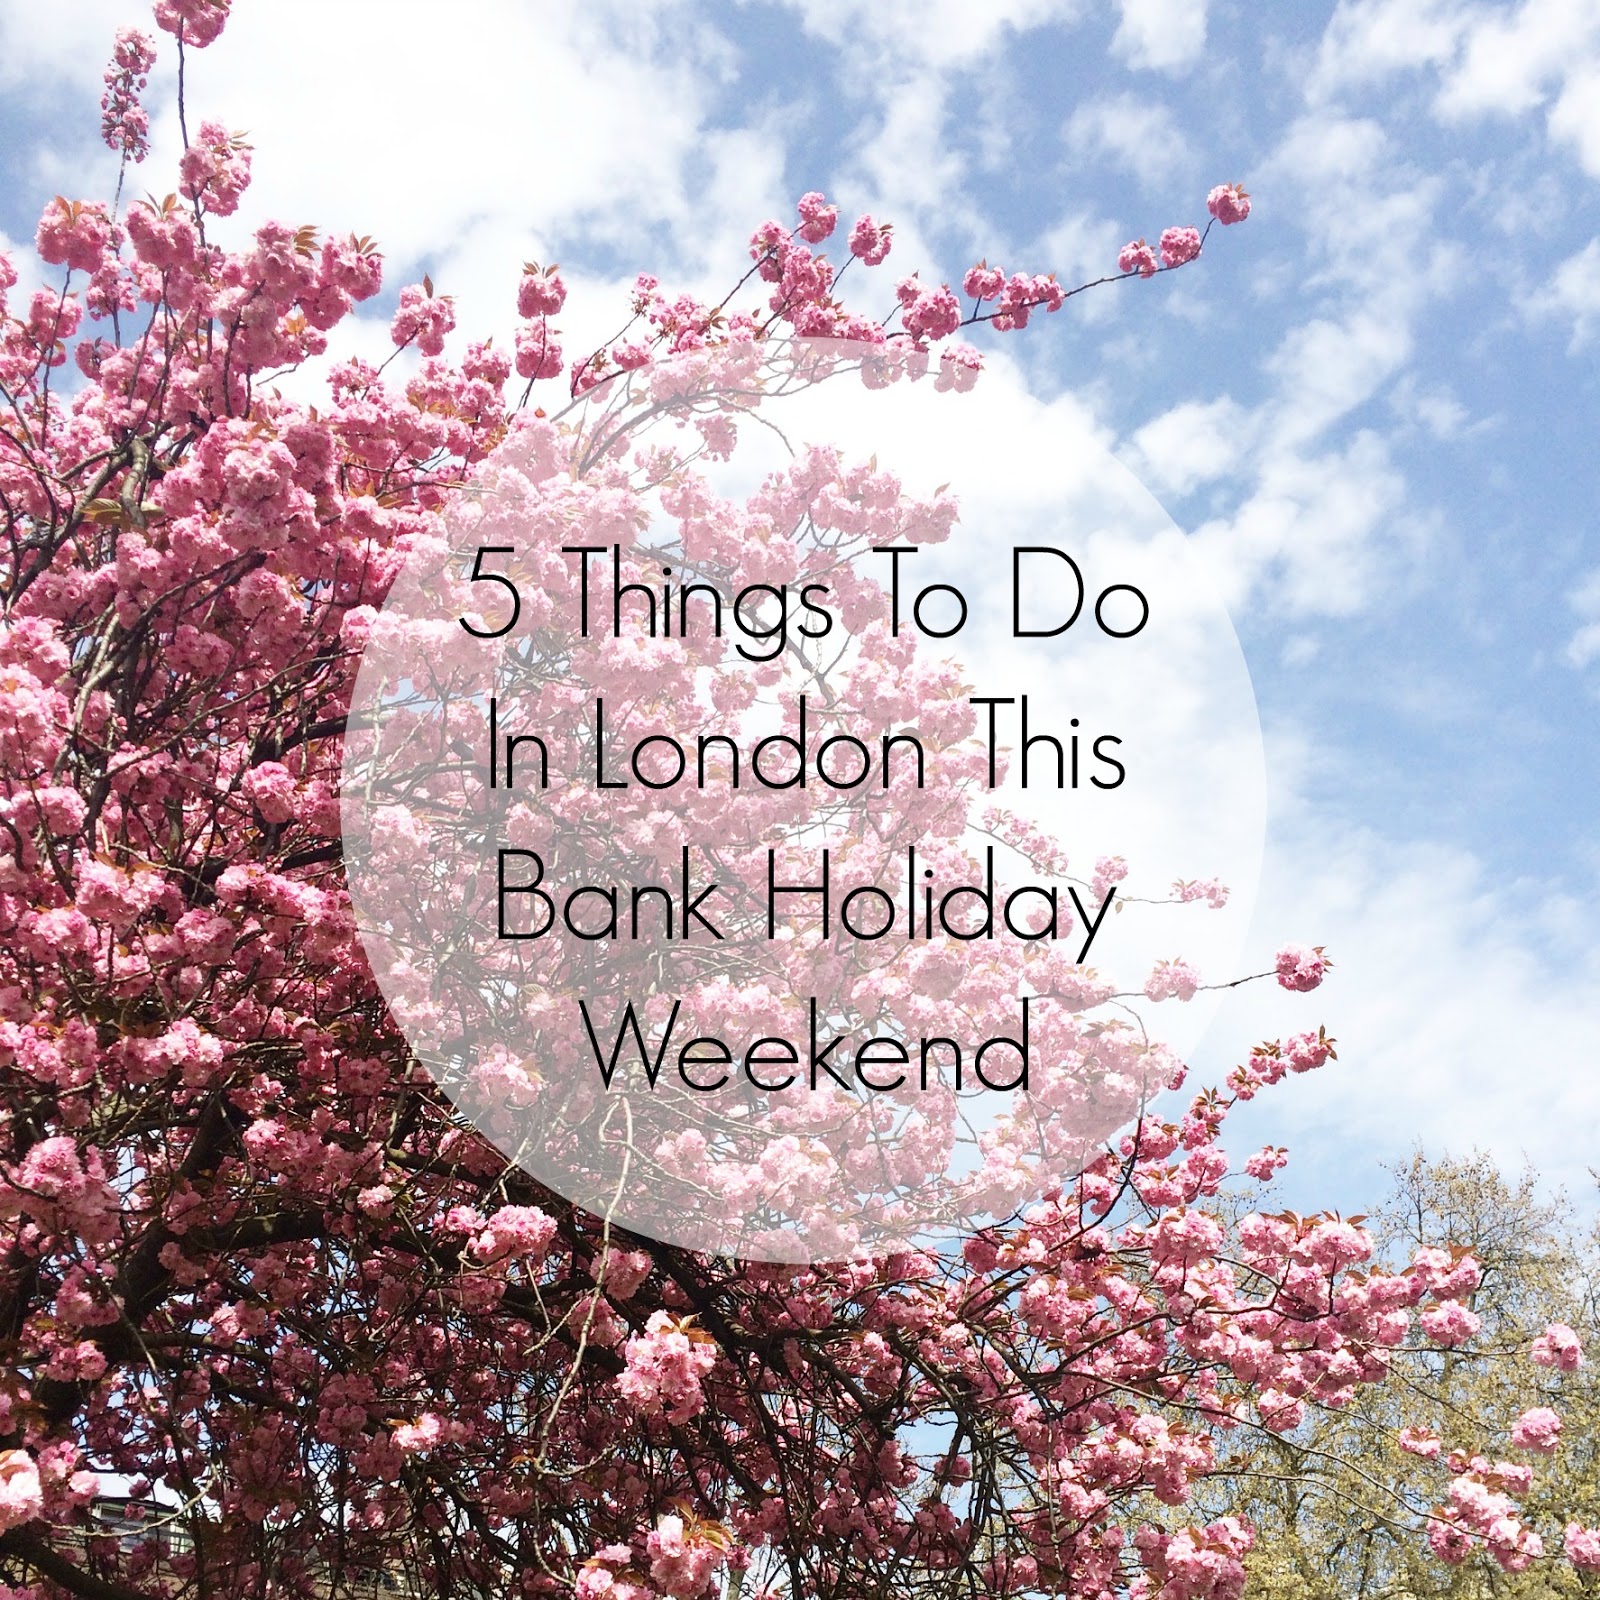 5 Things To Do In London This Bank Holiday Weekend